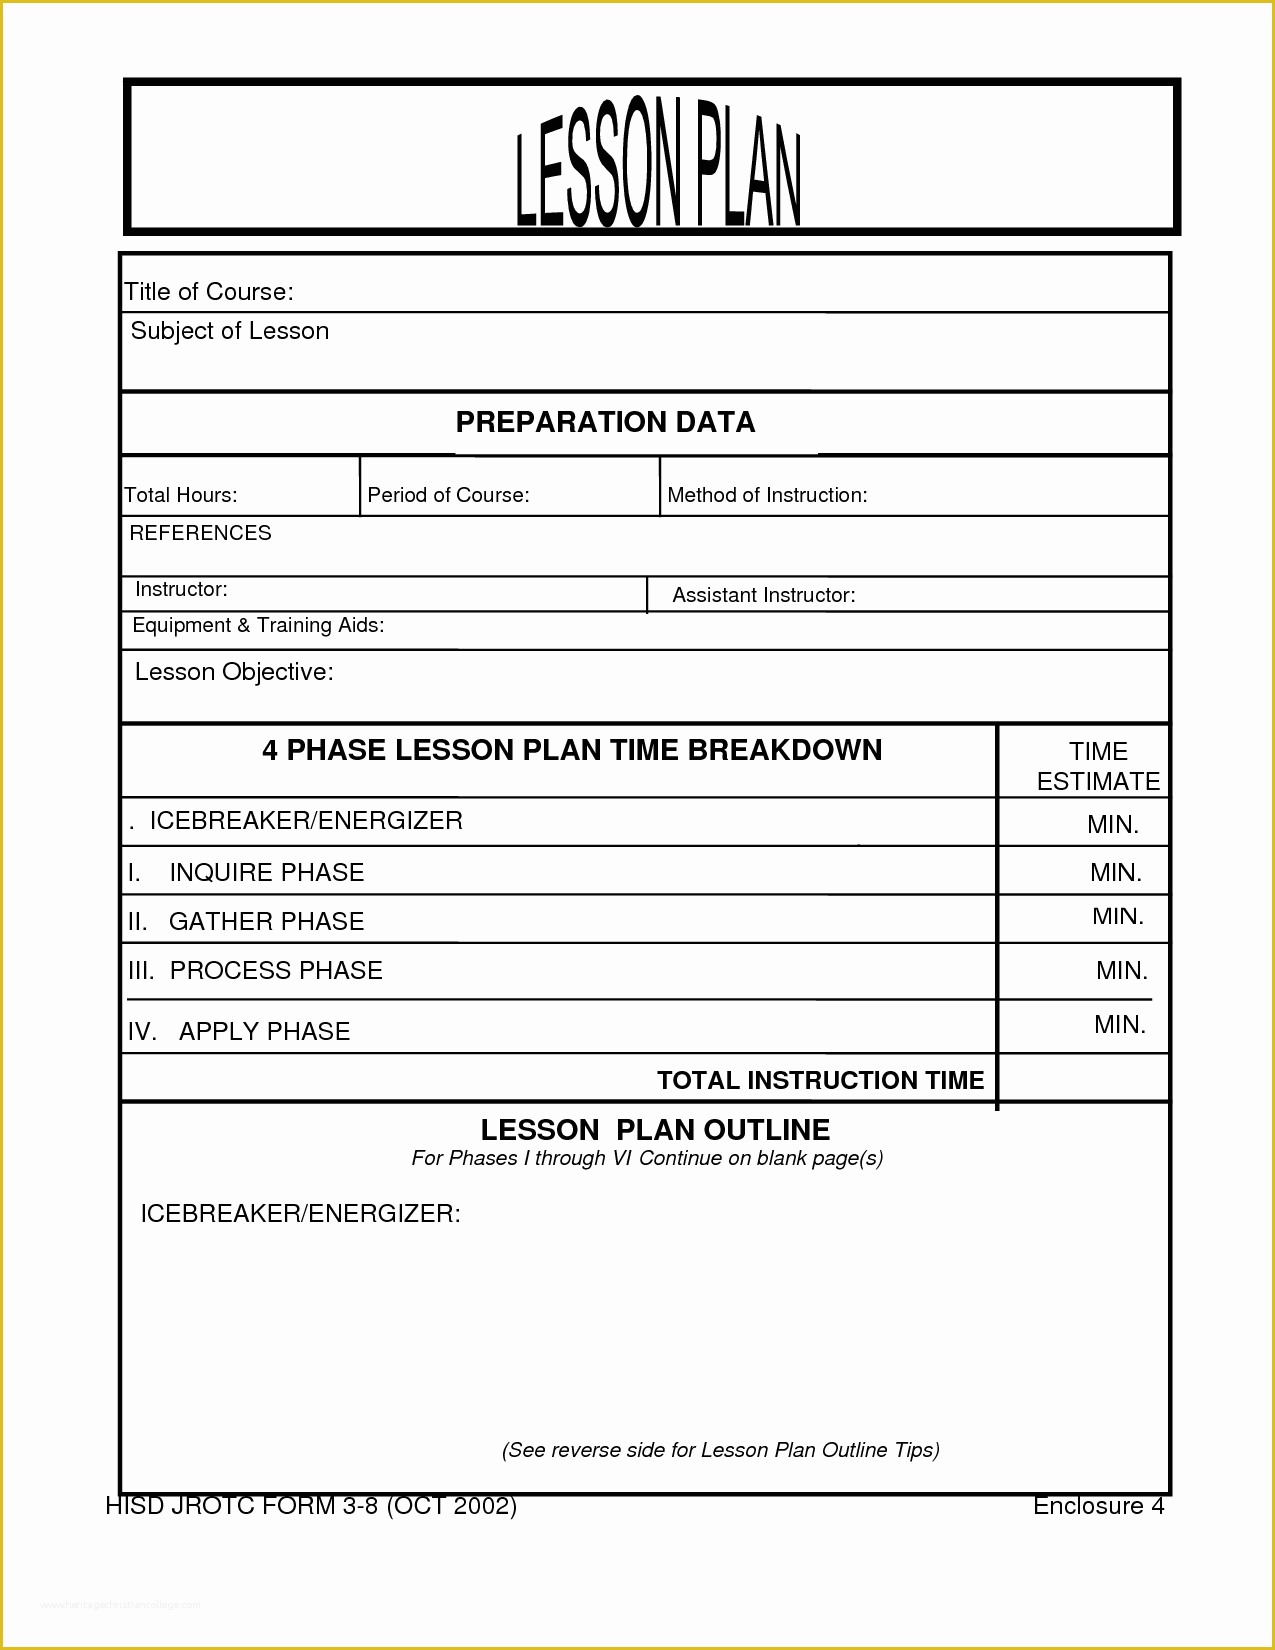 Free Printable Lesson Plan Template Blank Of Search Results for “blank Lesson Plan forms Printable